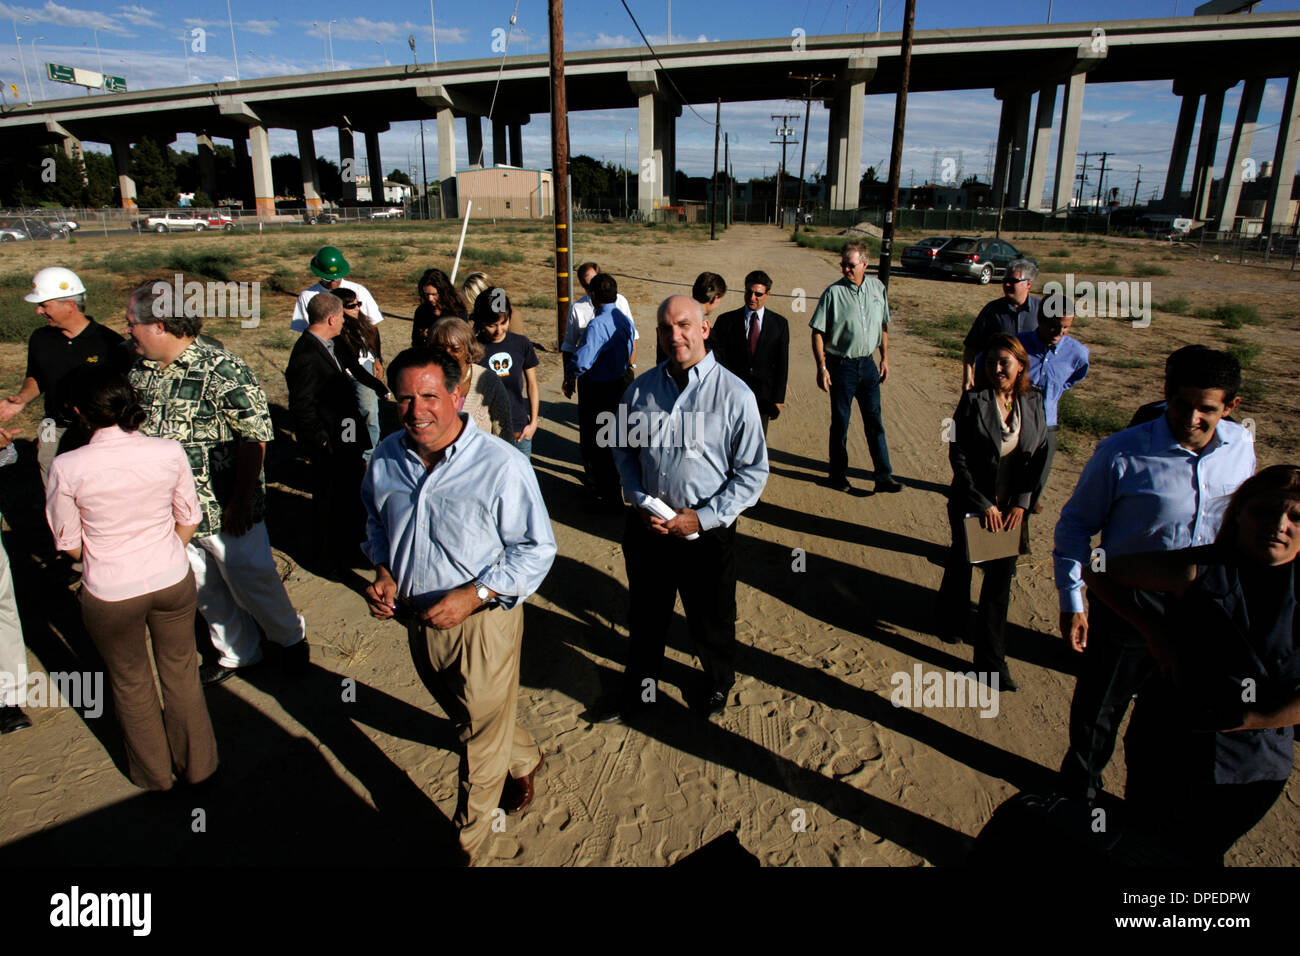 (Published 10/29/2006, B-1) October 5, 2006 San Diego, CA SAM MARASCO, lead developer of Mercado Alliance, left, walks with ROGER SHIPP, center, and others as they finish with a portrait of a group of contributors to the project. The group had plans to build a housing and commercial center on a 6.8 acre site in Barrio Logan at the intersection of CESAR E. CHAVEZ Parkway and Newton  Stock Photo